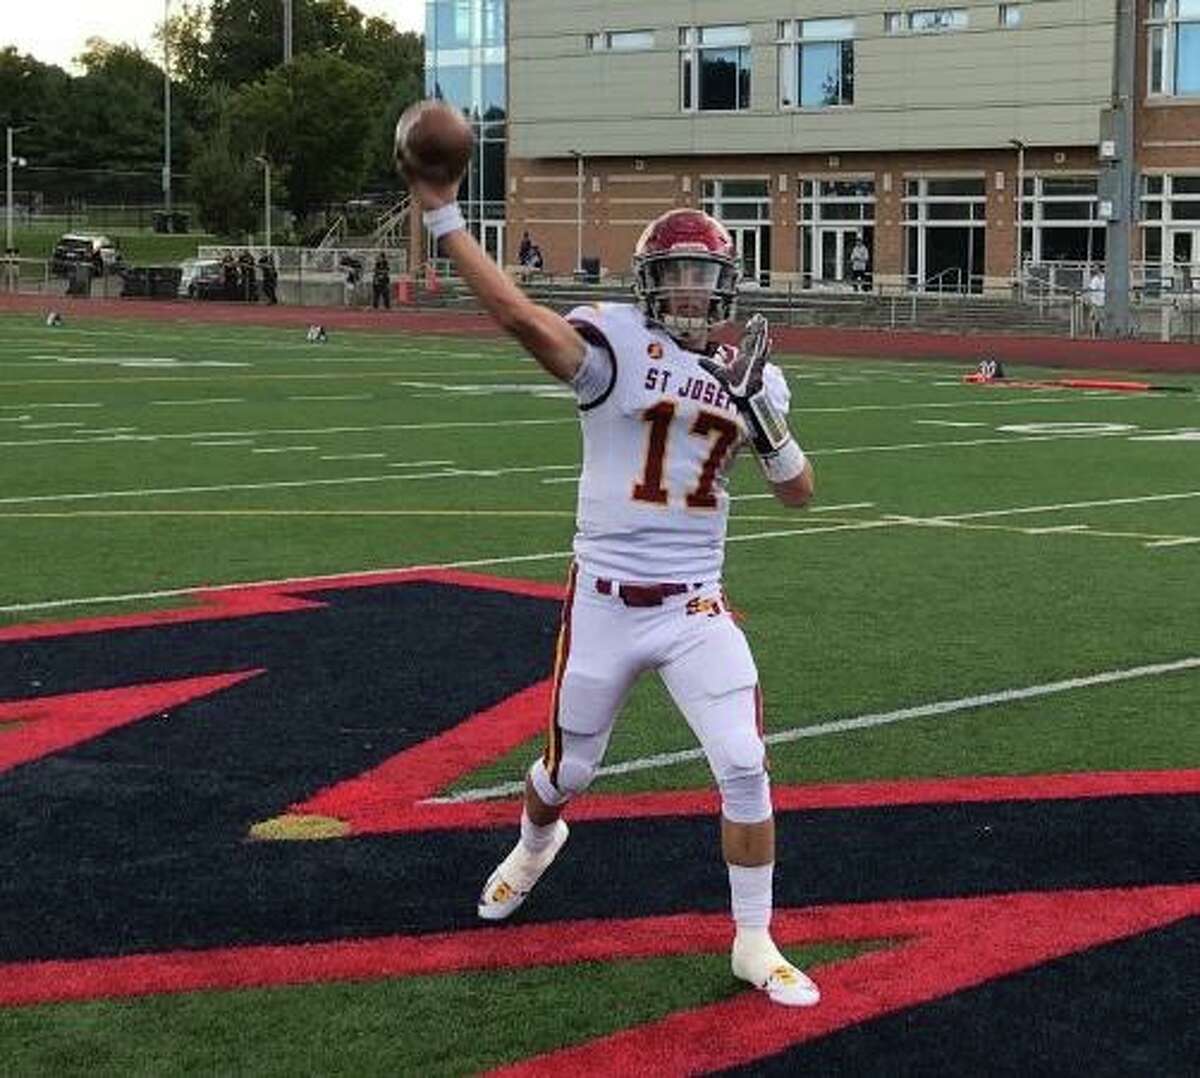 Jack Wallace threw for five touchdowns in his first varsity start at quarterback for St. Joseph on Friday.